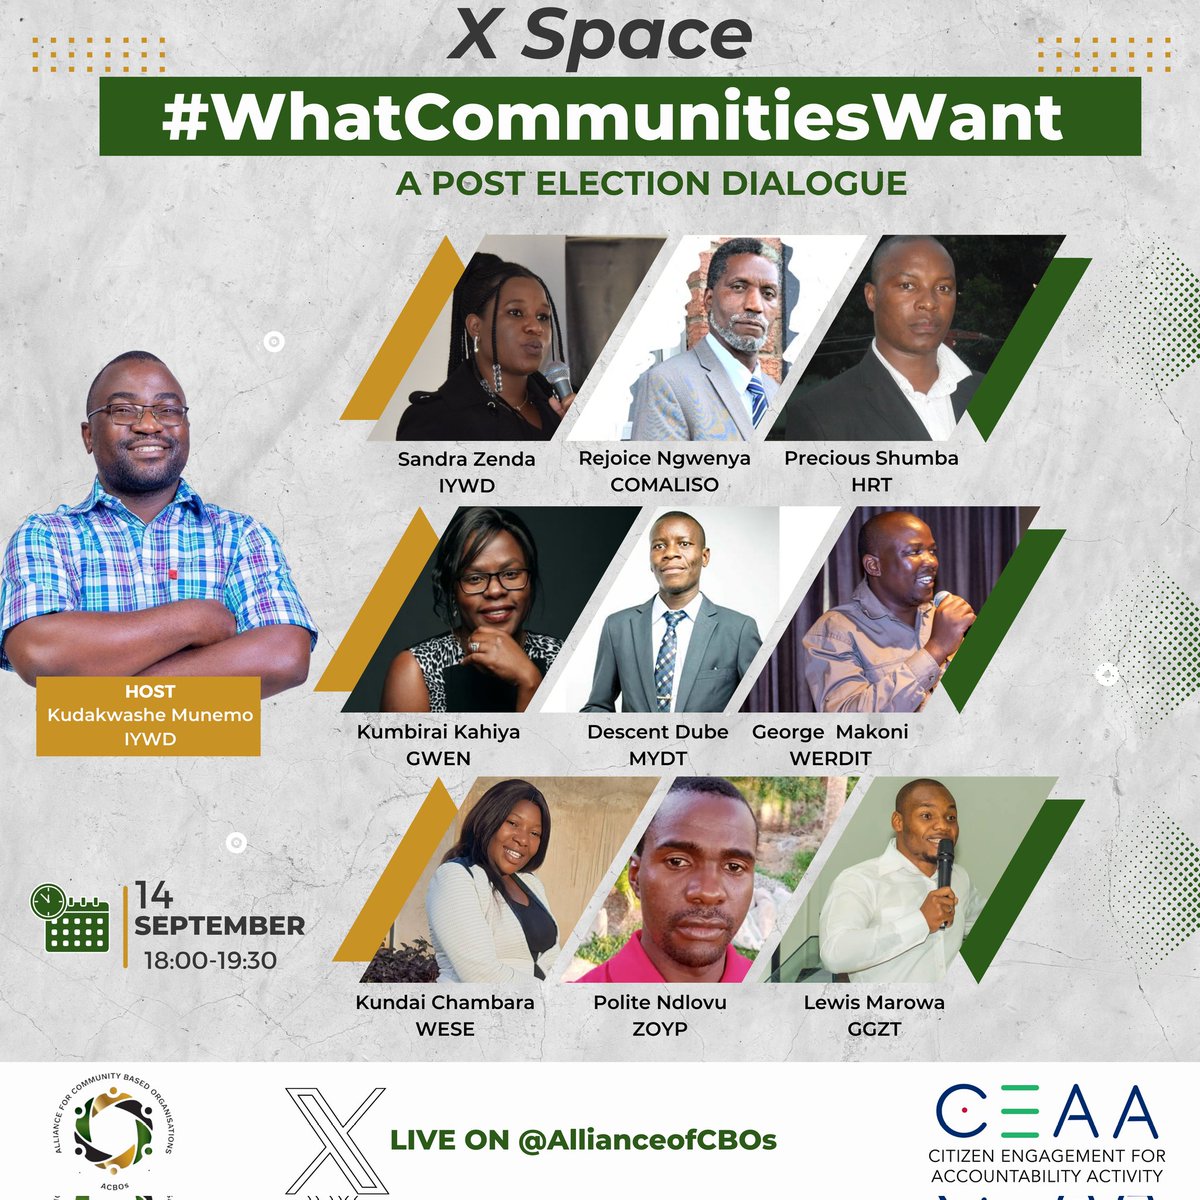 Set a reminder for our upcoming Space on #WhatCommunitiesWant. The space will focus on communities' key asks in relation to service delivery and access to low-income housing to the newly elected candidates. x.com/i/spaces/1zqJV… @Isivunguzane @sandyzenda @glanyline